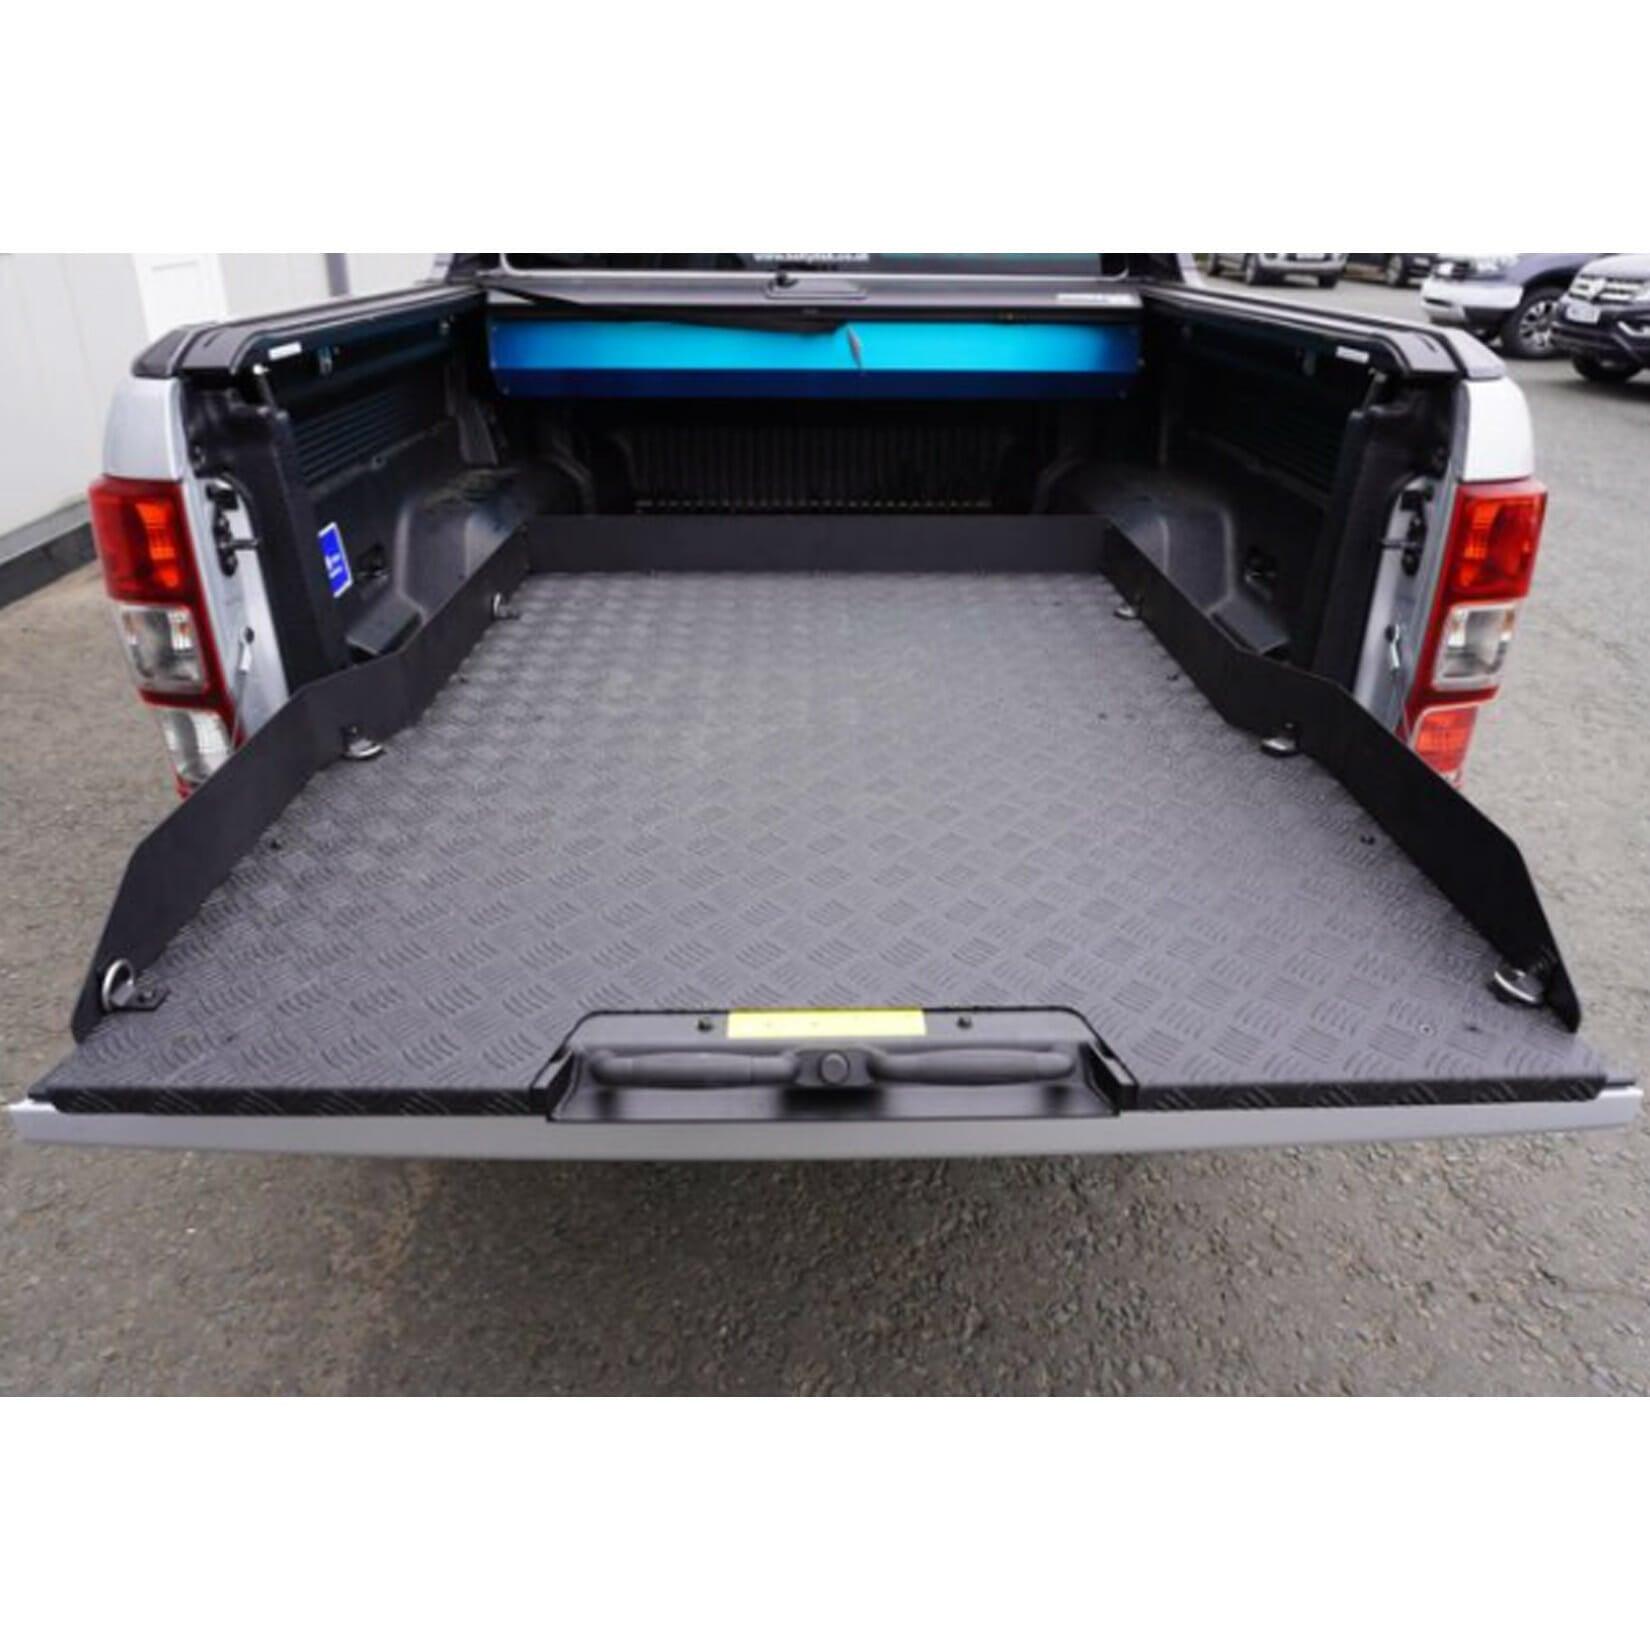 UNIVERSAL HEAVY DUTY LOAD BED METAL SLIDING TRAY FOR DOUBLE CAB PICK UPS - IN BLACK - Storm Xccessories2